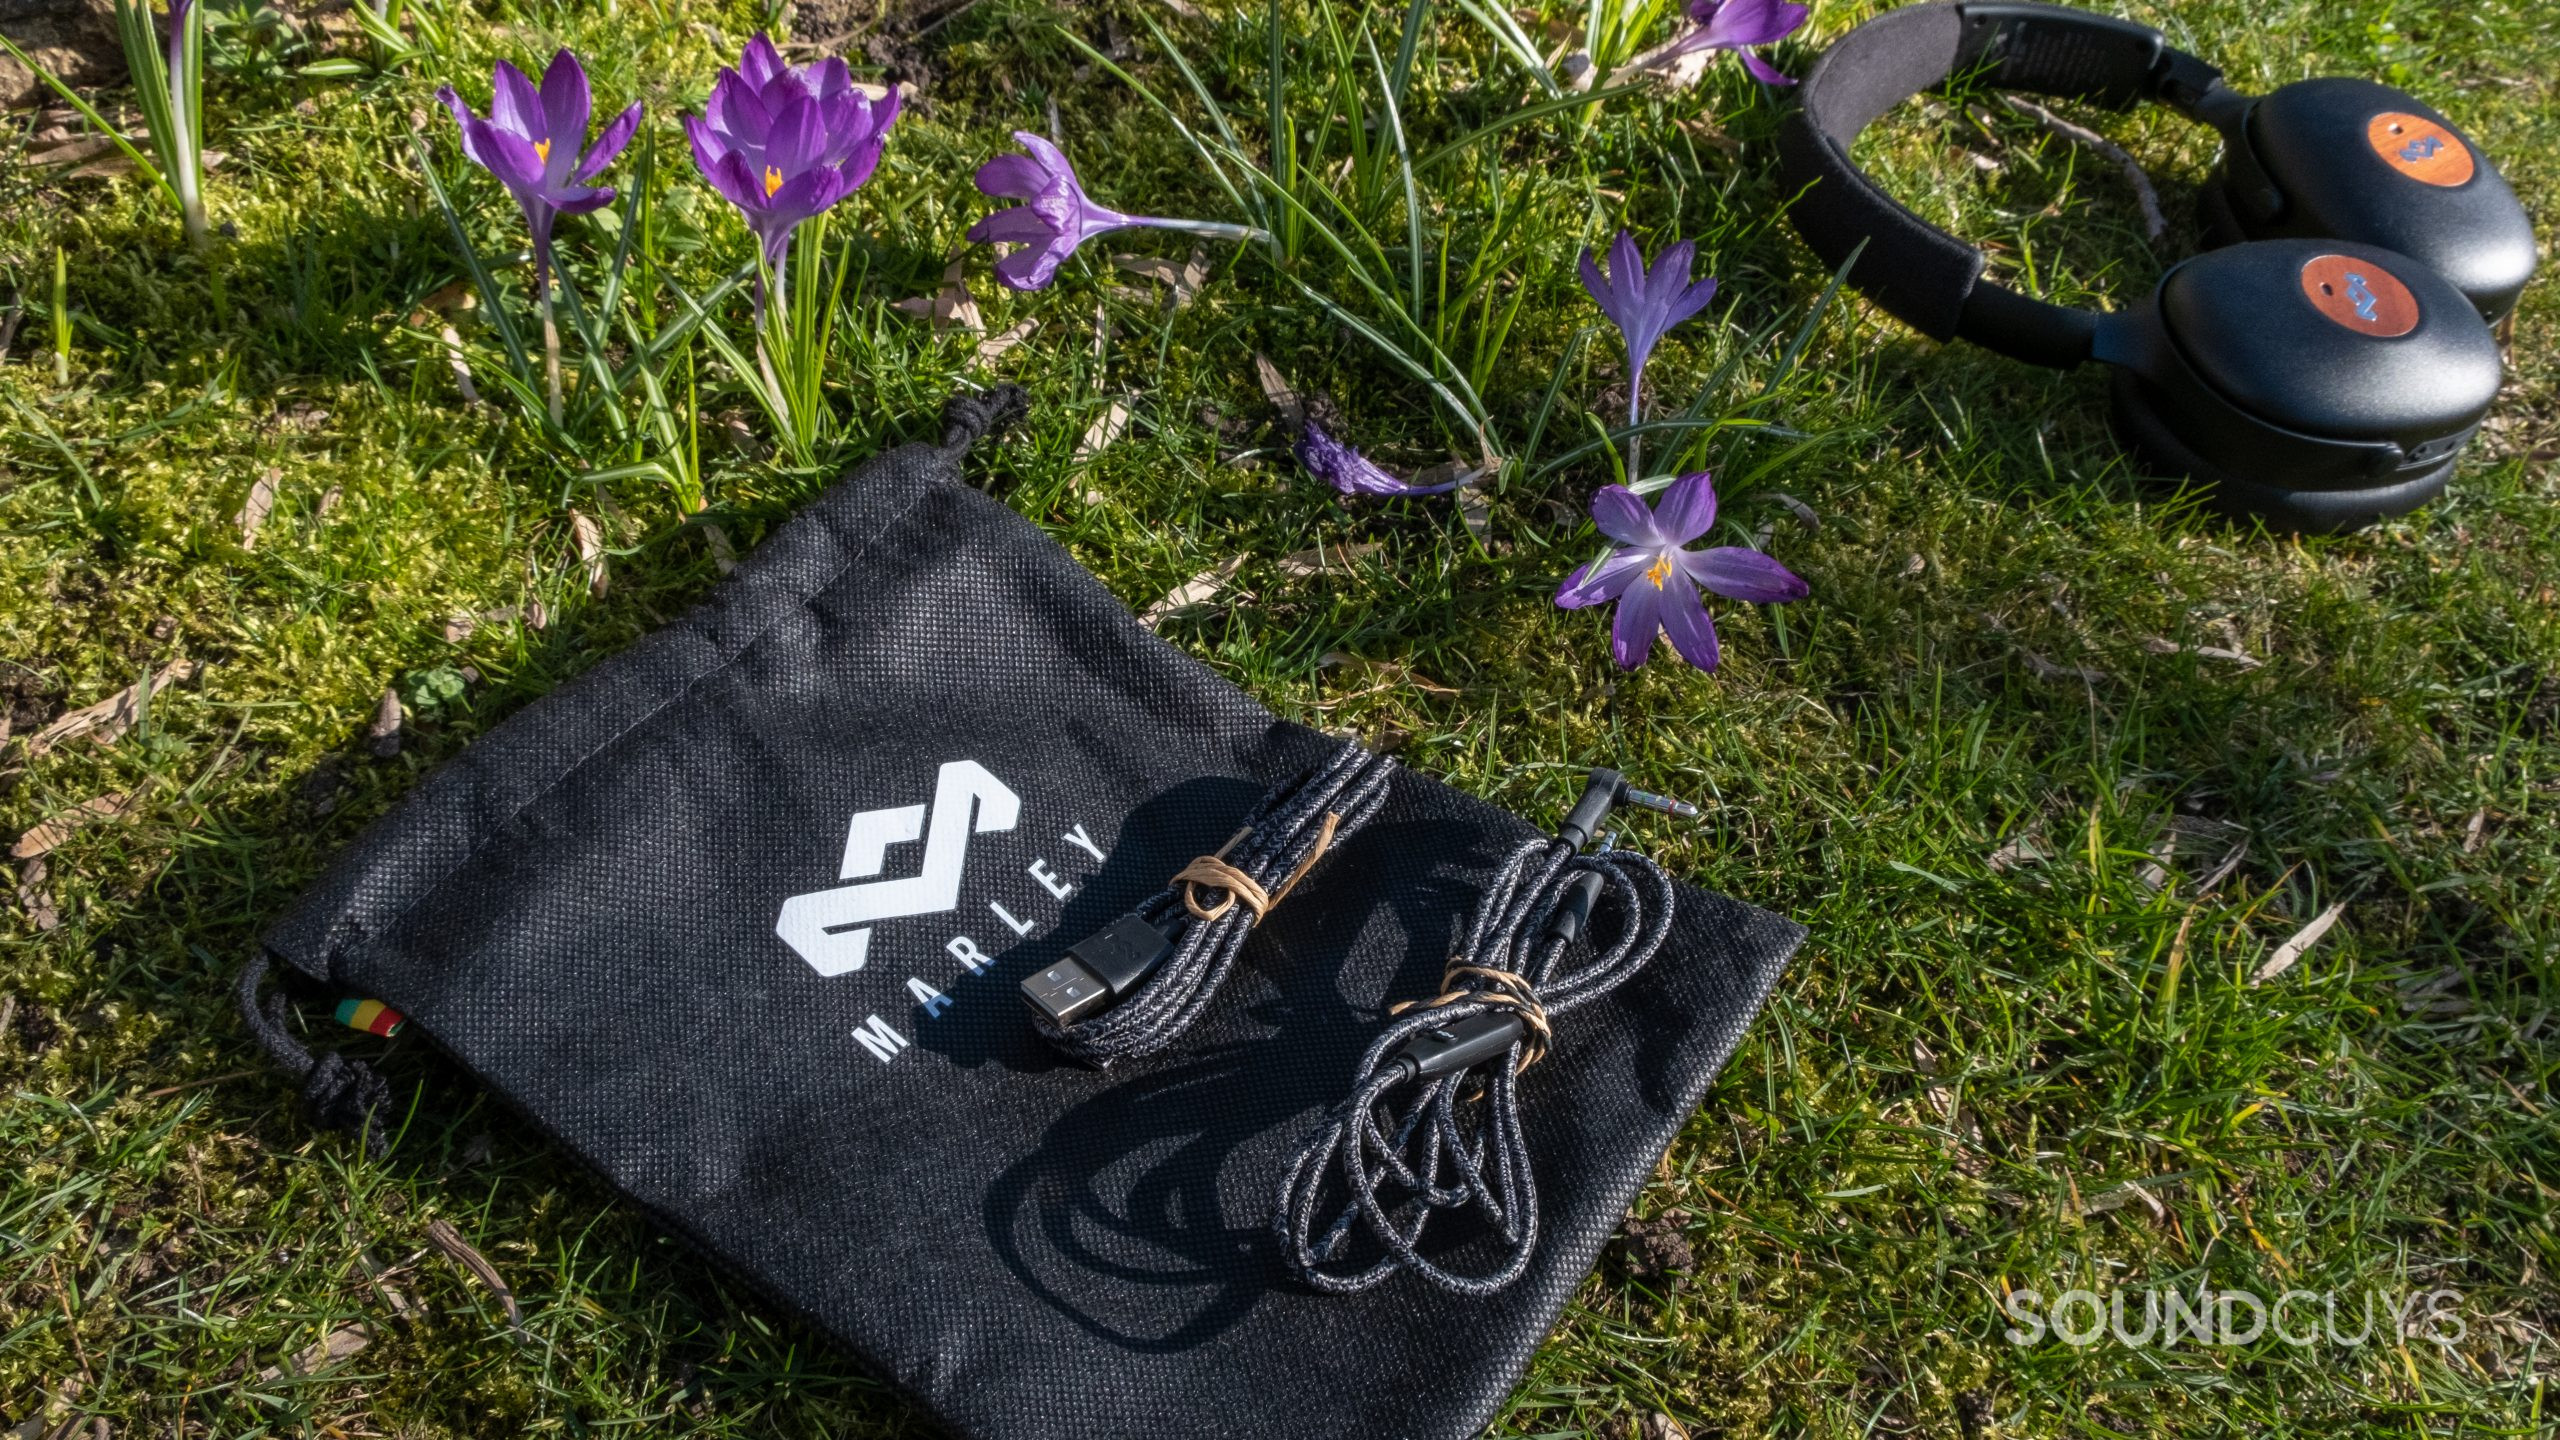 The accessories of the House of Marley Positive Vibration XL ANC including a carry pouch, headphone cable, and USB-C charging cable lay on grass next to flowers.